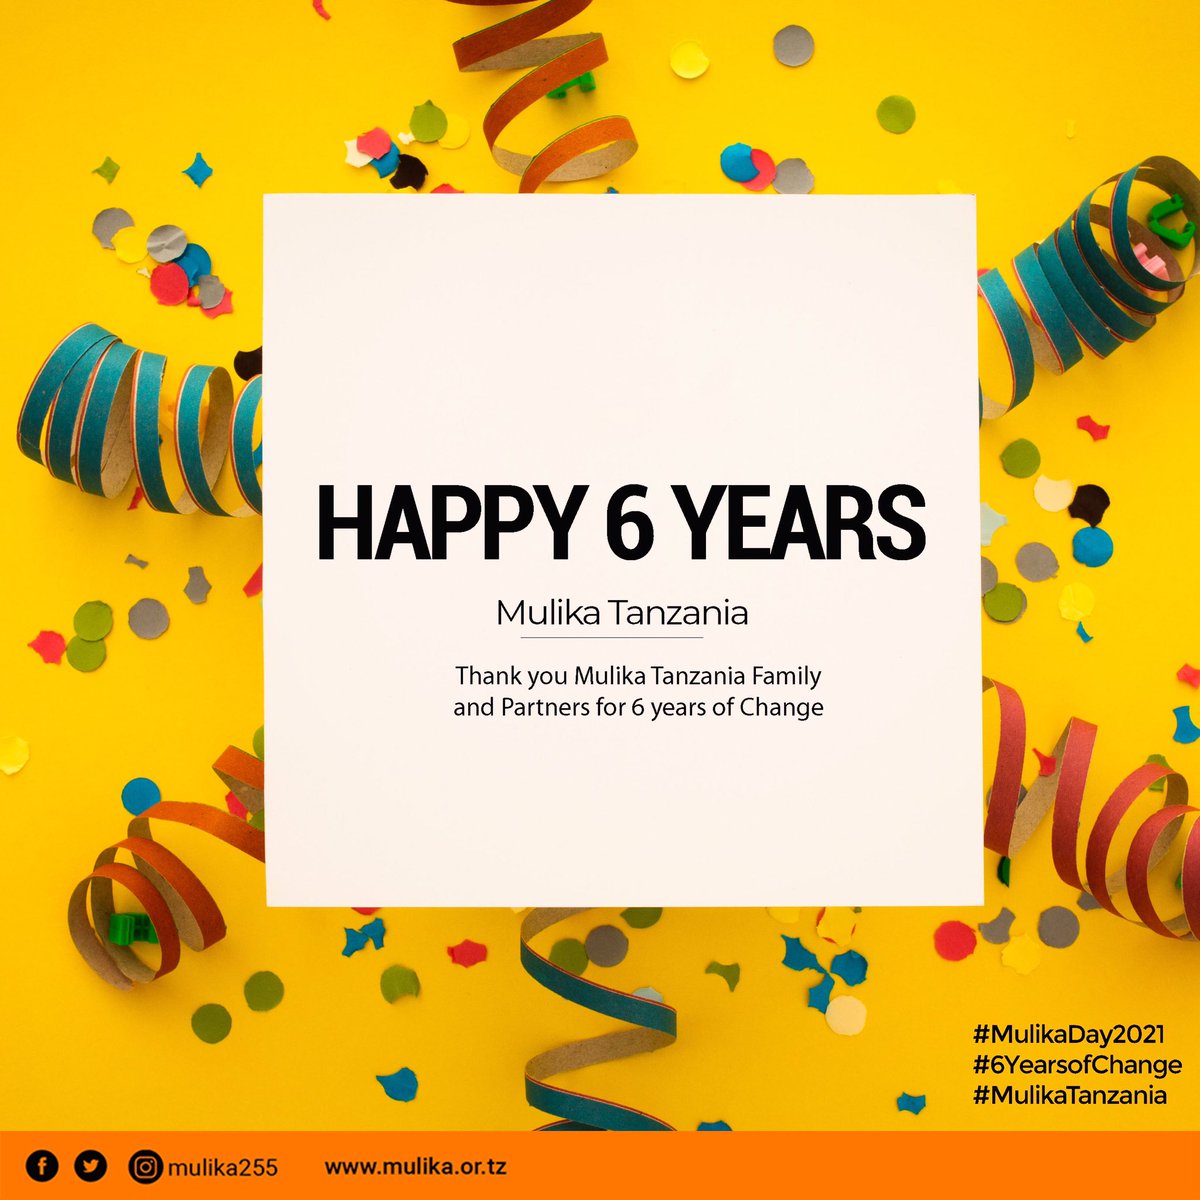 As we celebrate 6 years of change and prosperity, We would like to extend our warm regards to everyone partaking in our growth. We appreciate your efforts and everything. Cheers 🥂 #MulikaDay2021 #6YearsofChange #MulikaTanzania